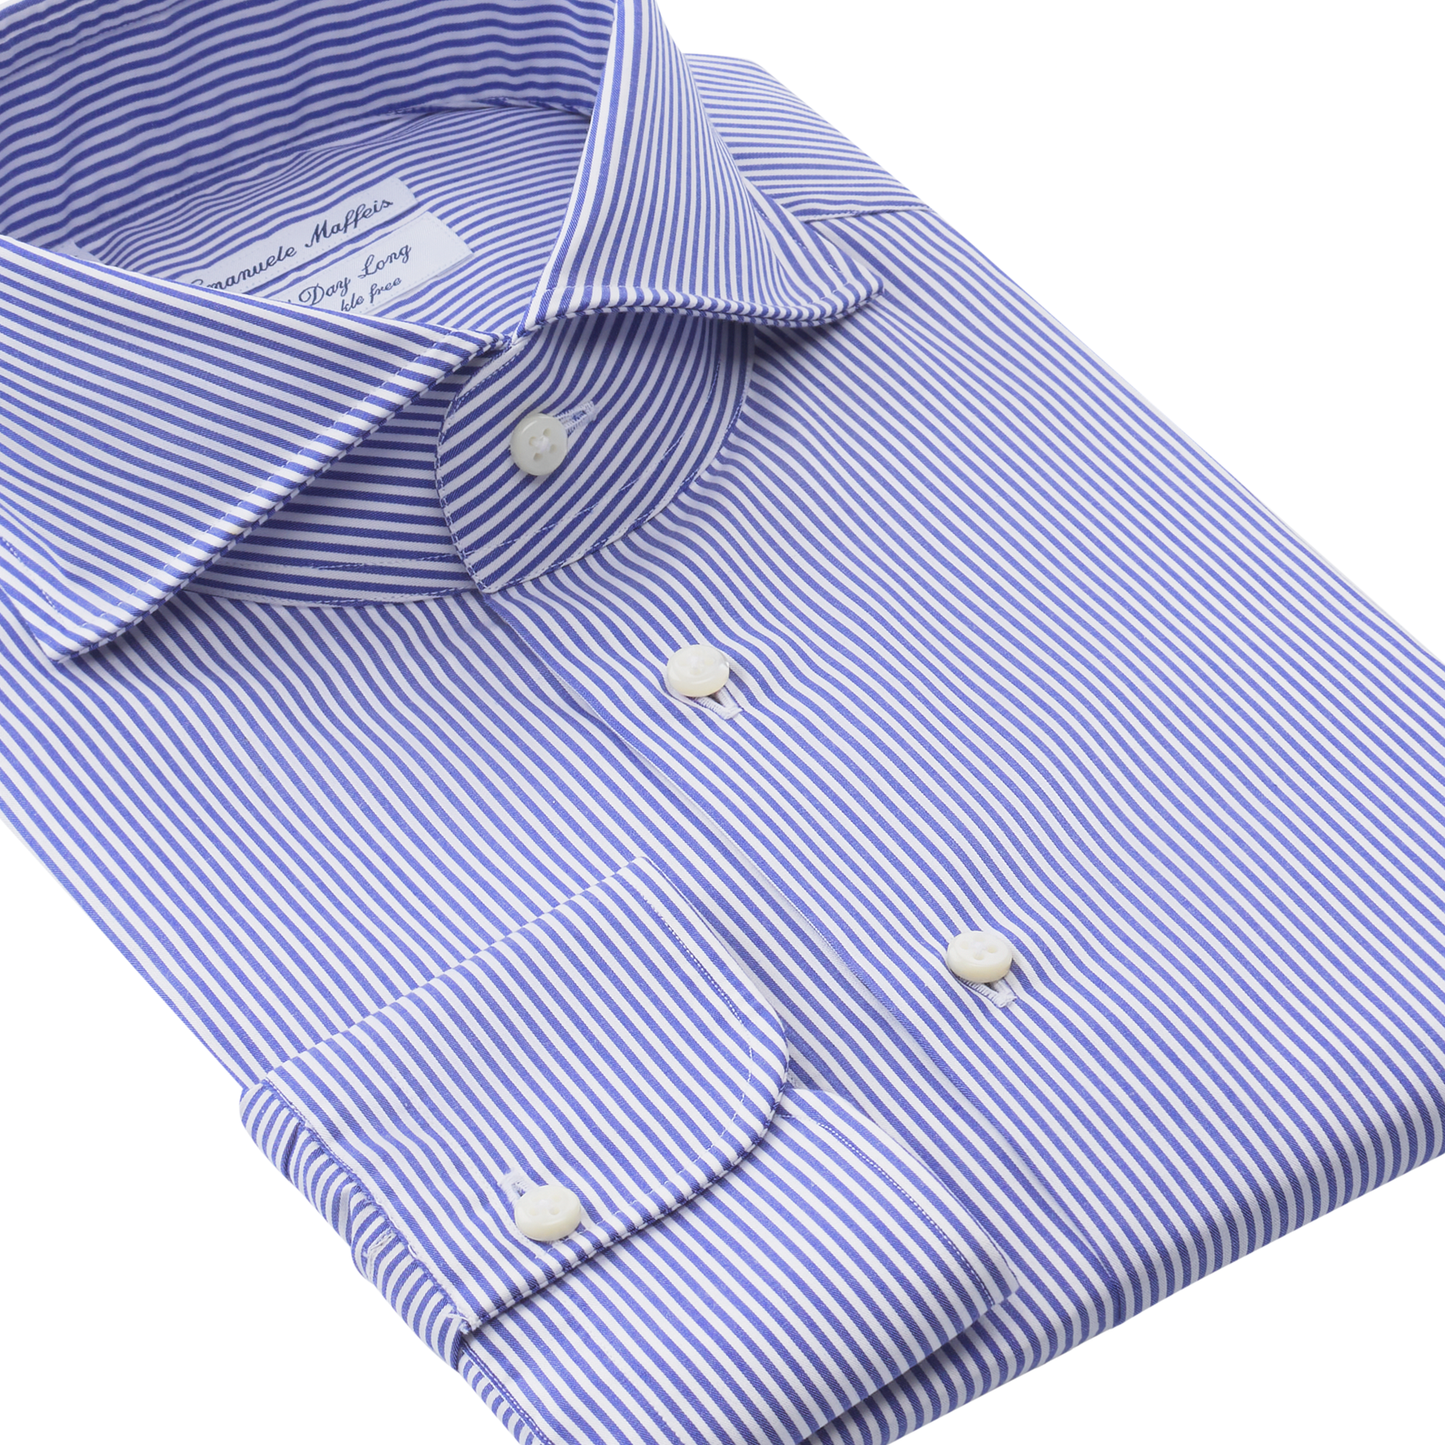 Emanuele Maffeis "All Day Long Collection" Striped Cotton Blue Shirt with Shark Collar - SARTALE